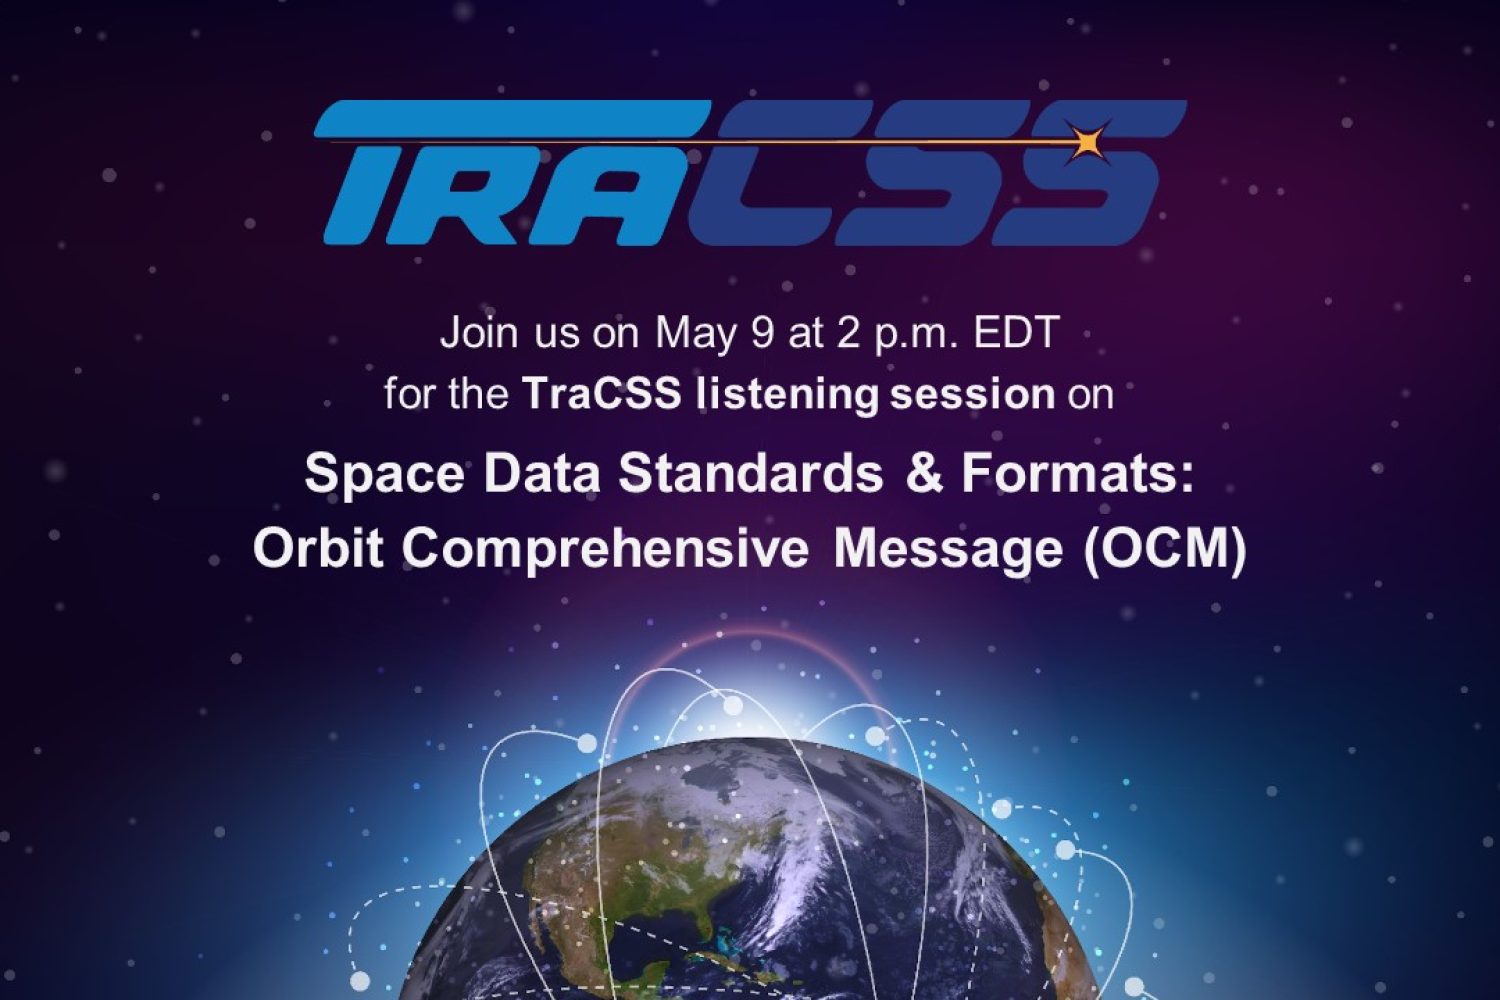 TraCSS logo | Join us on May 9 at 2 p.m. EDT for the TraCSS listening session on Space Data Standards & Formats: Orbit Comprehensive Message (OCM)